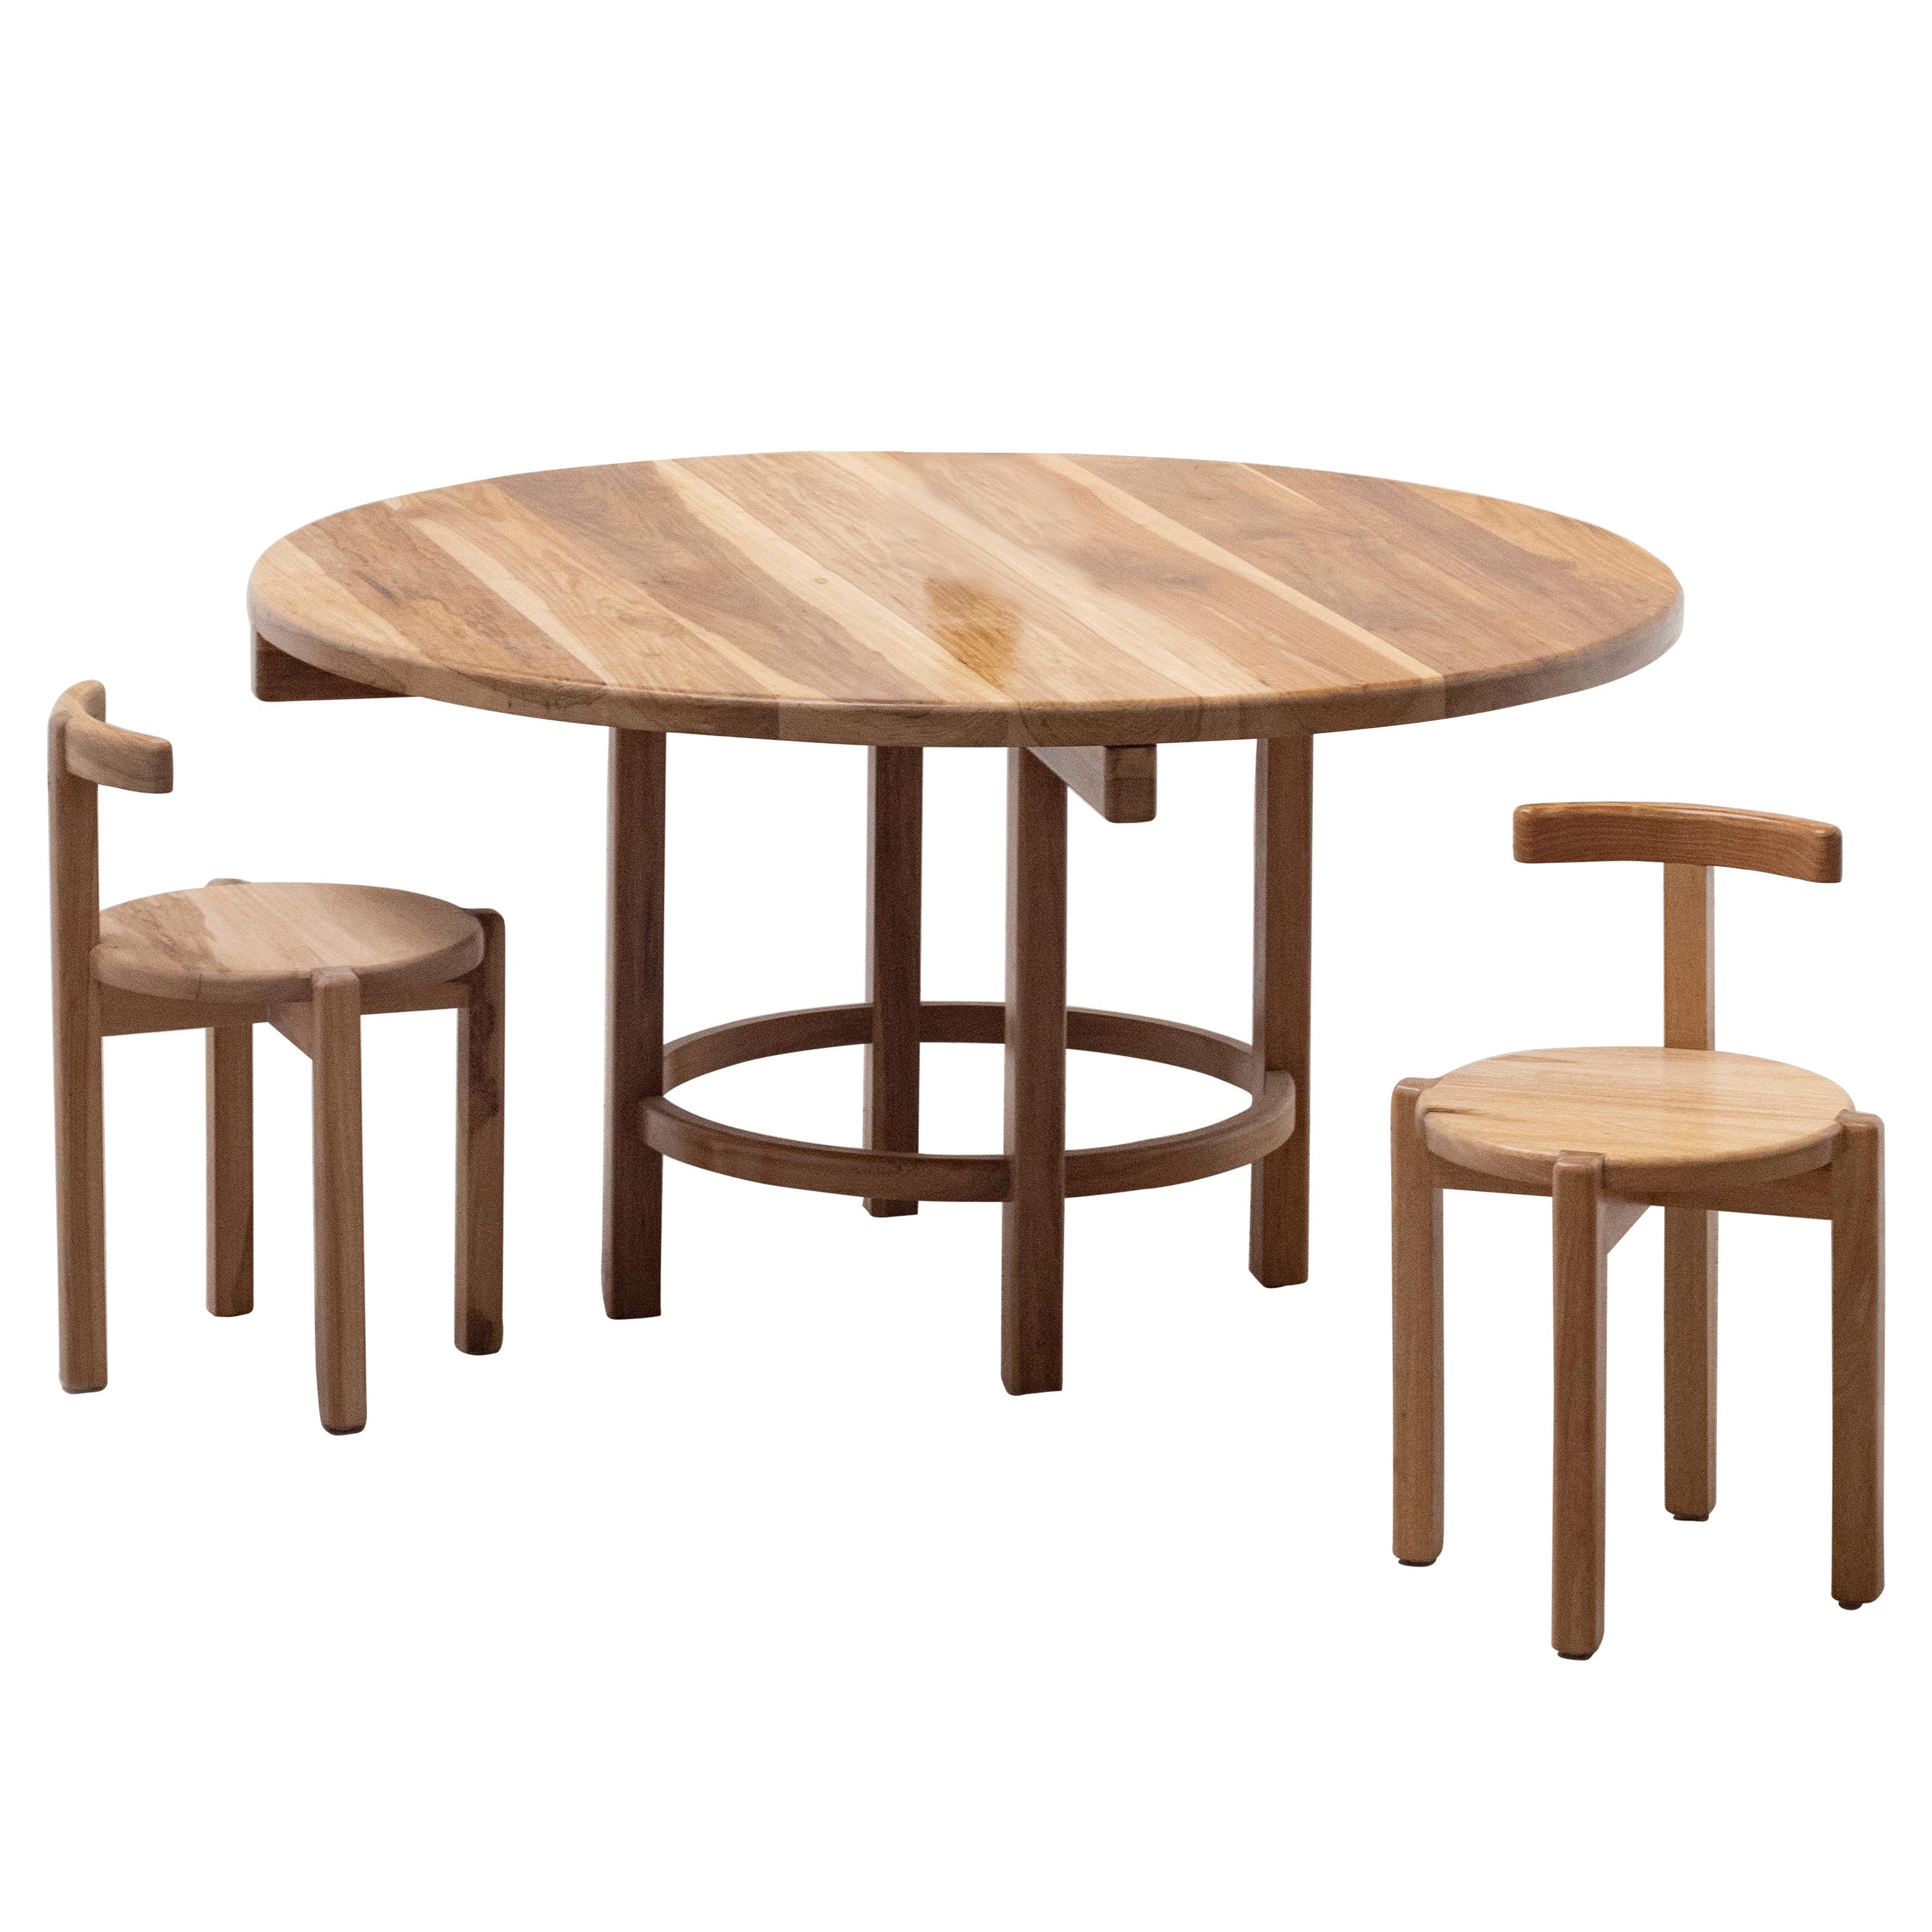 Set of Orno Round Dining Table & 2 Chairs by Ries For Sale